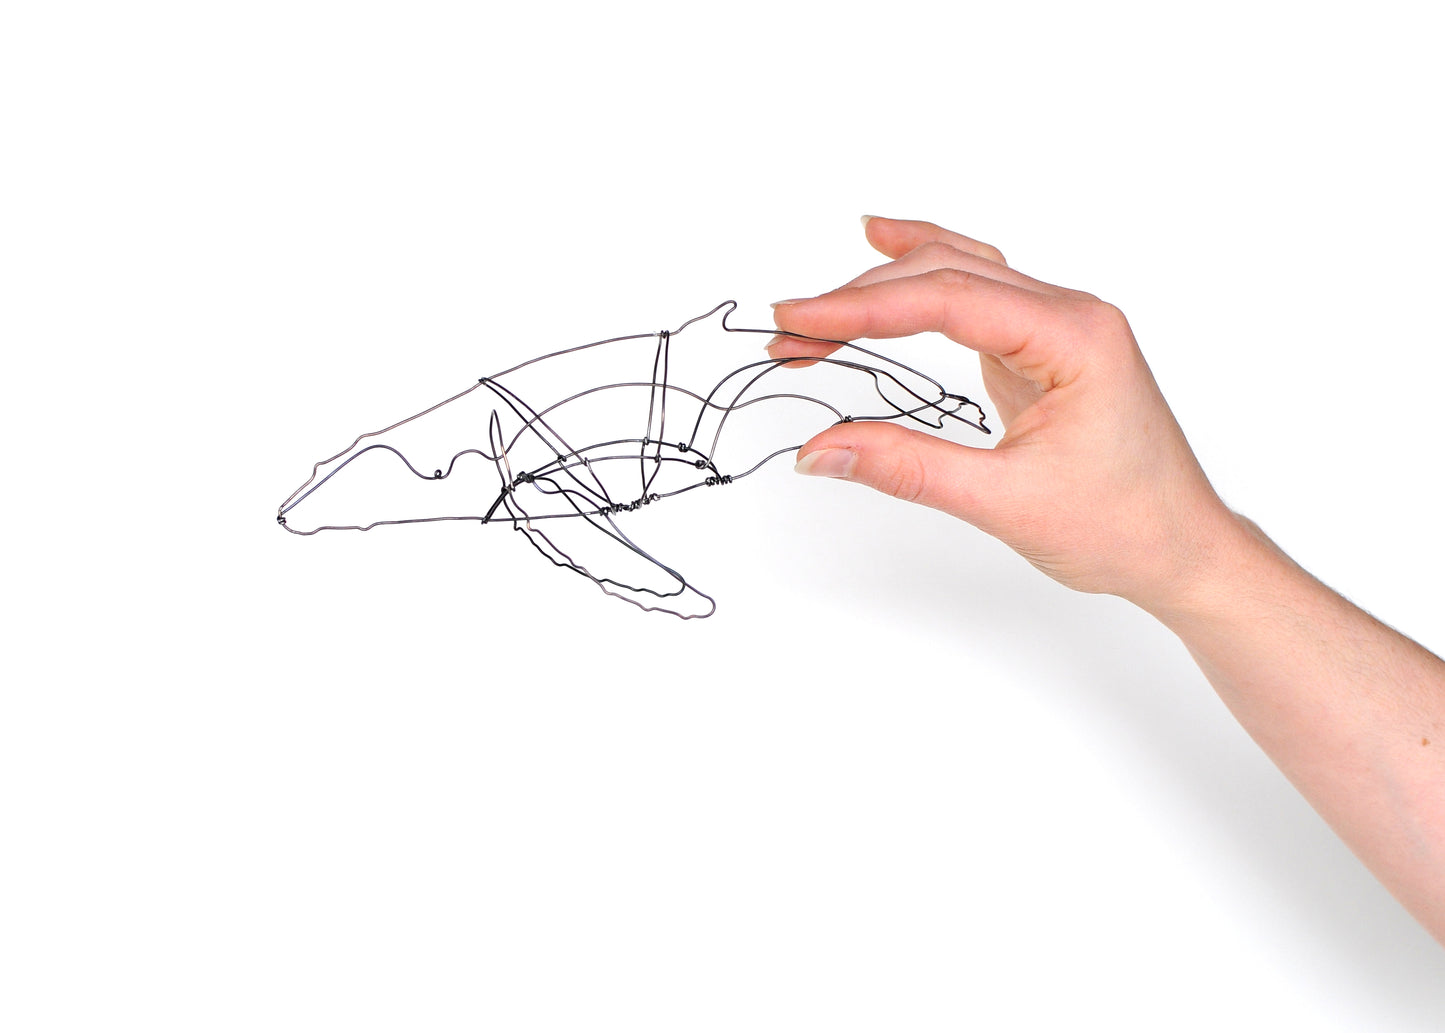 Photo of a 3D wire humpback whale sculpture held in hand.